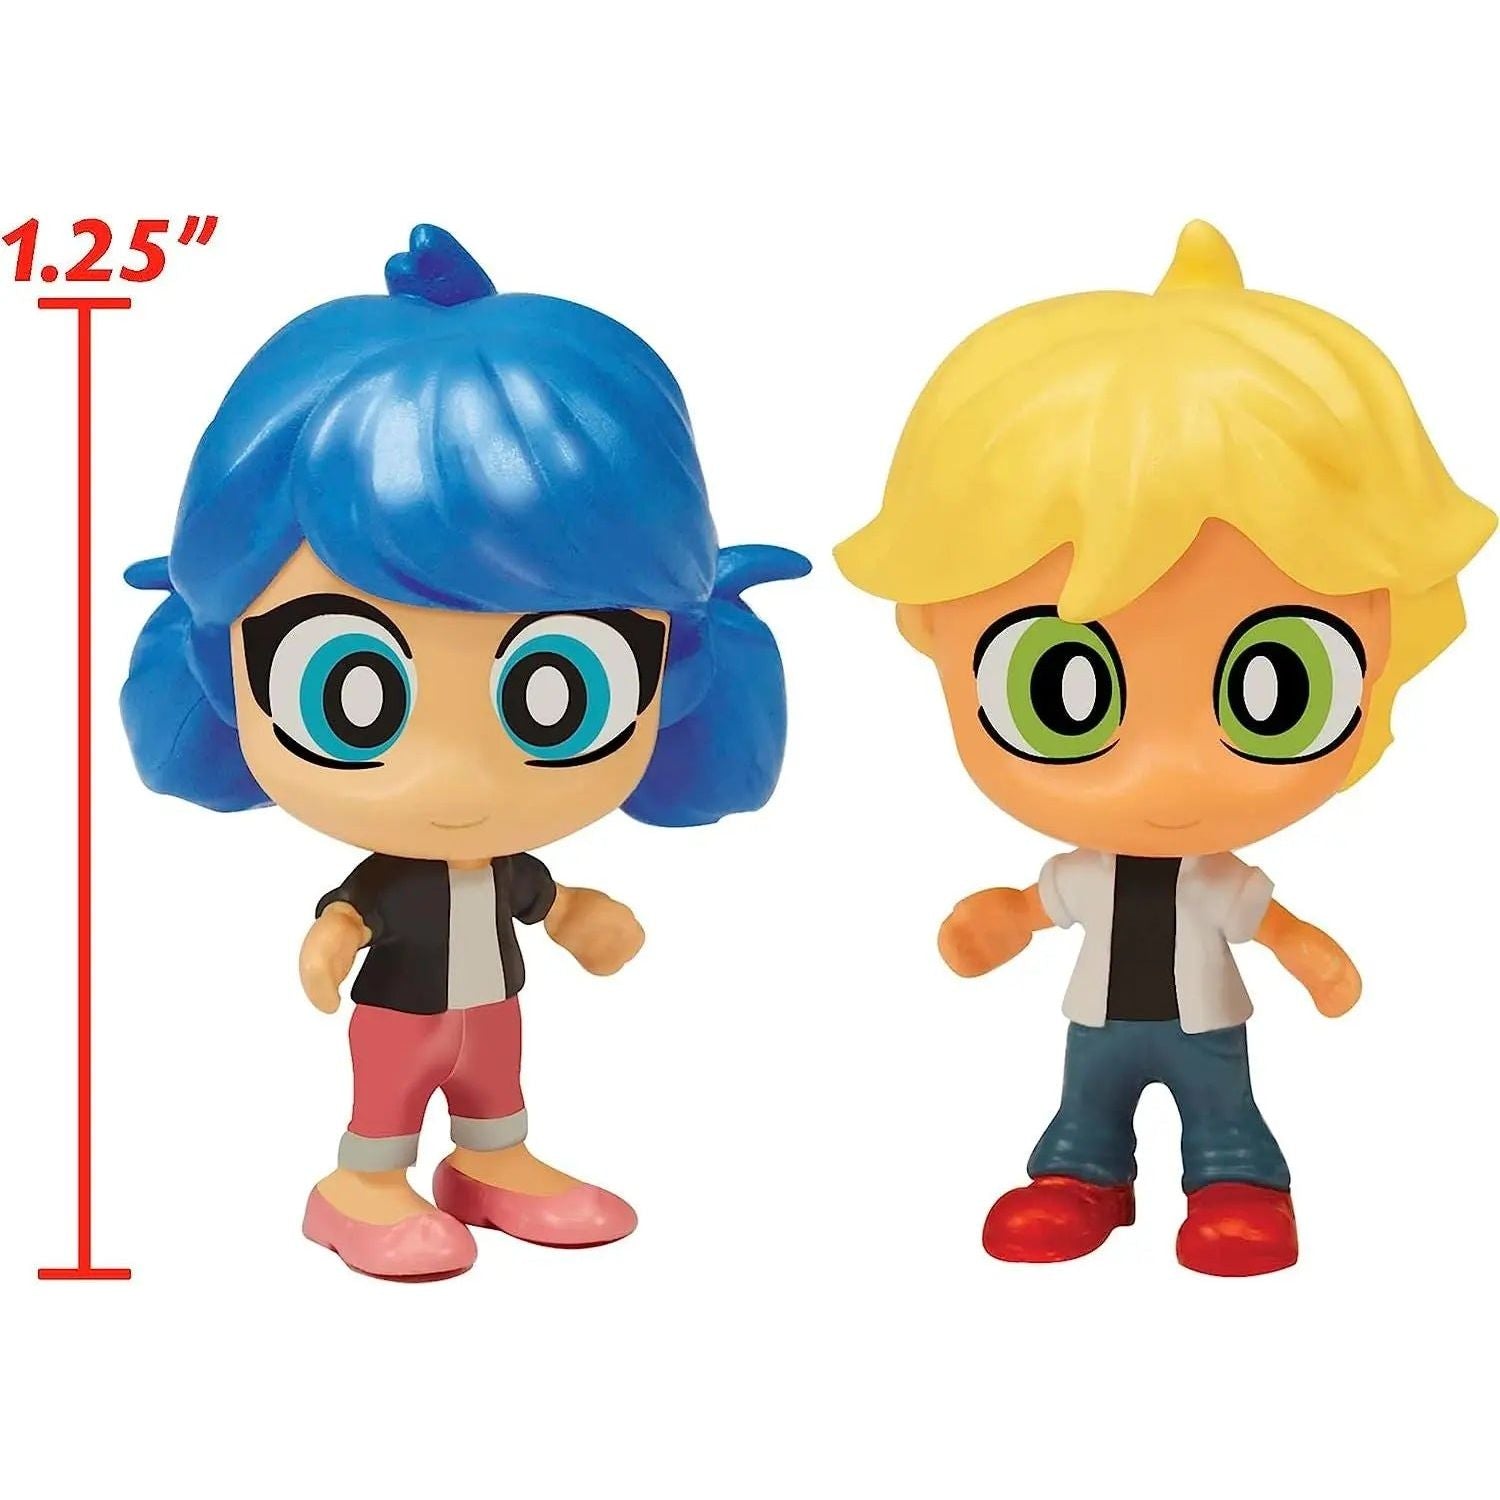 Looking for any miraculous ladybug in box Bandai dolls in the uk. Is anyone  selling any? Thank you : r/miraculousladybug